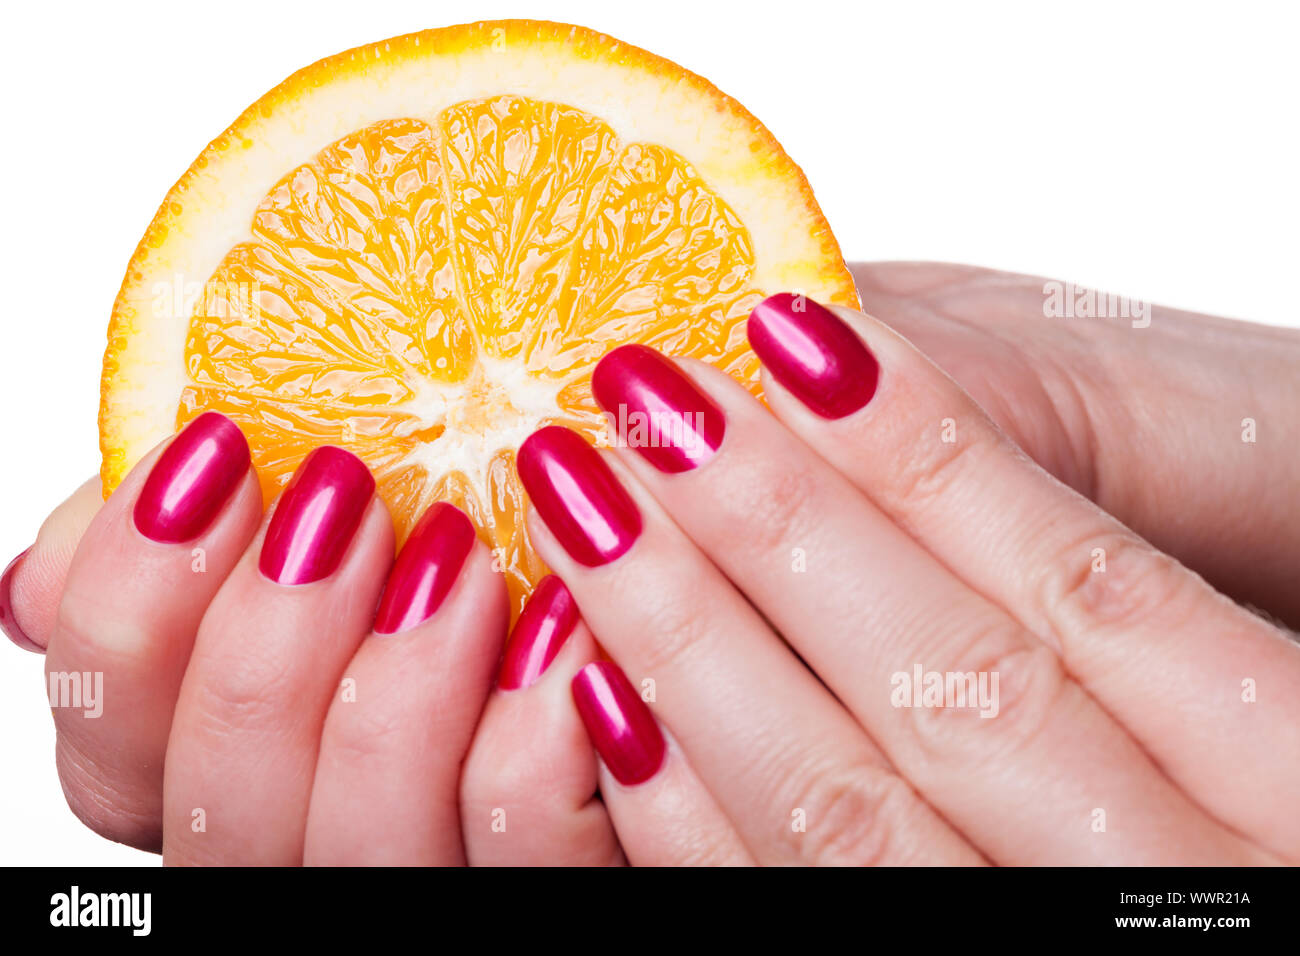 Hand with manicured nails touch an orange on white Stock Photo